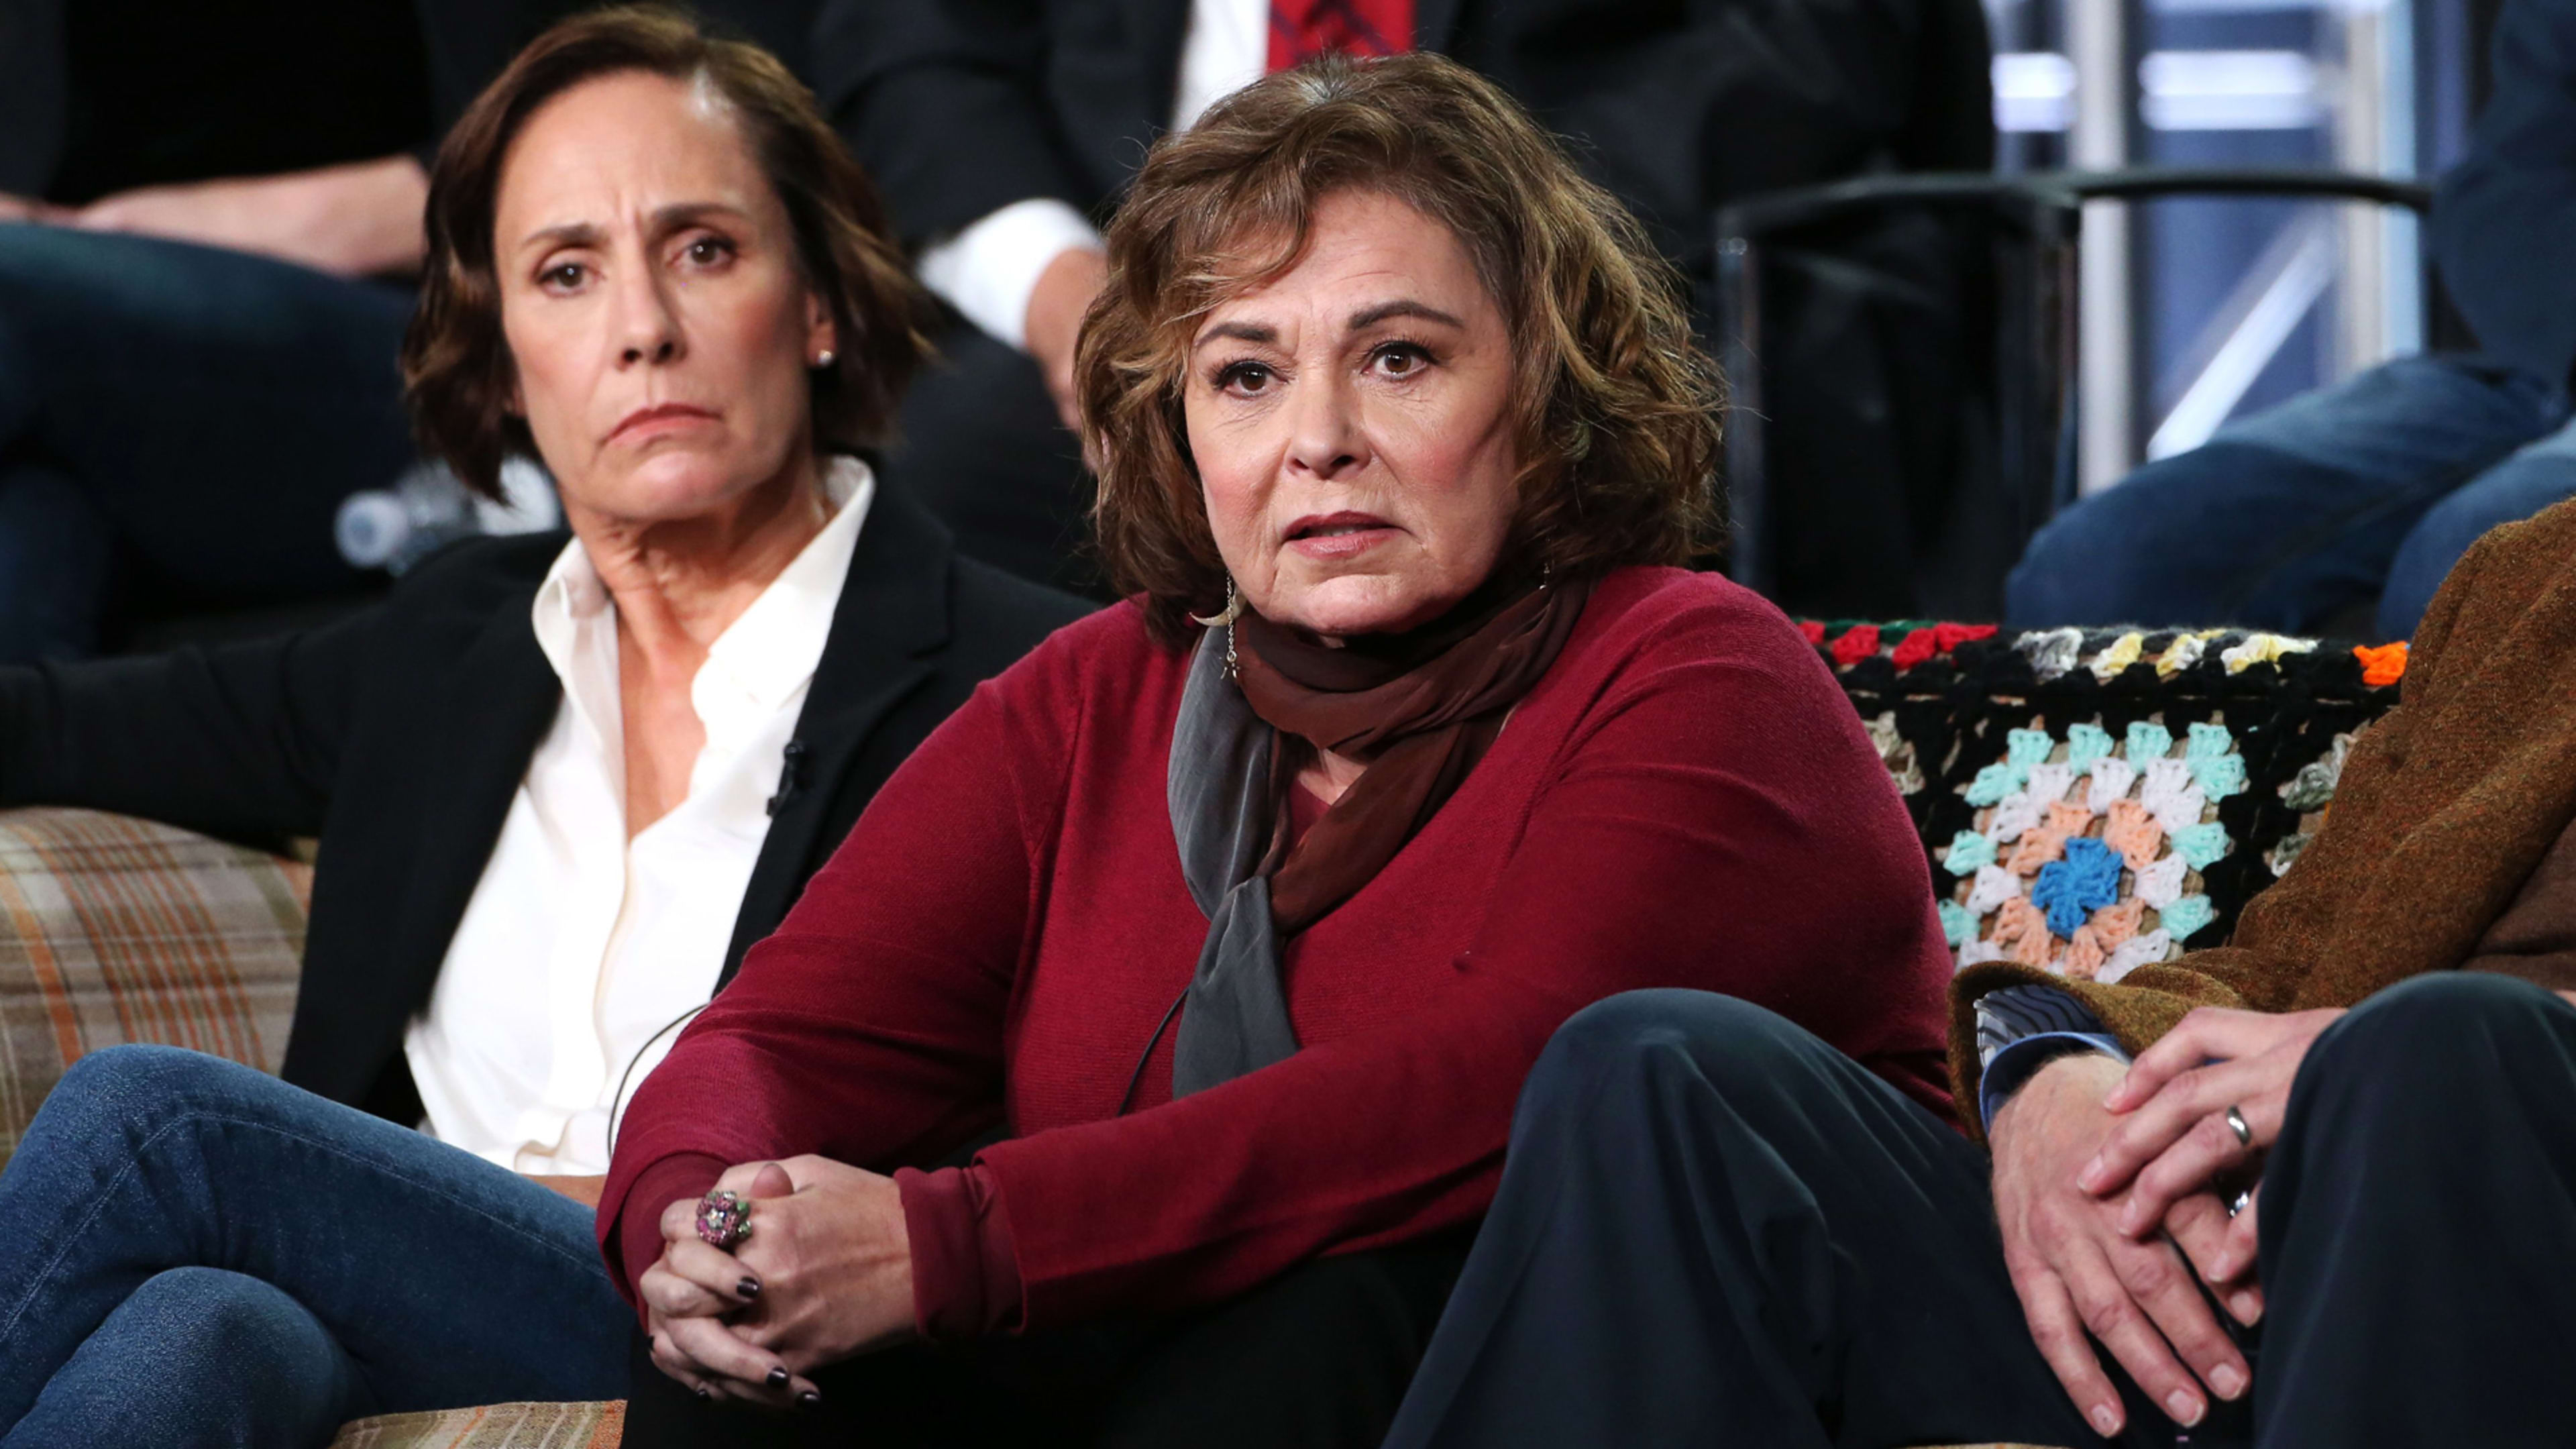 Ambien just delivered an epic clapback to Roseanne